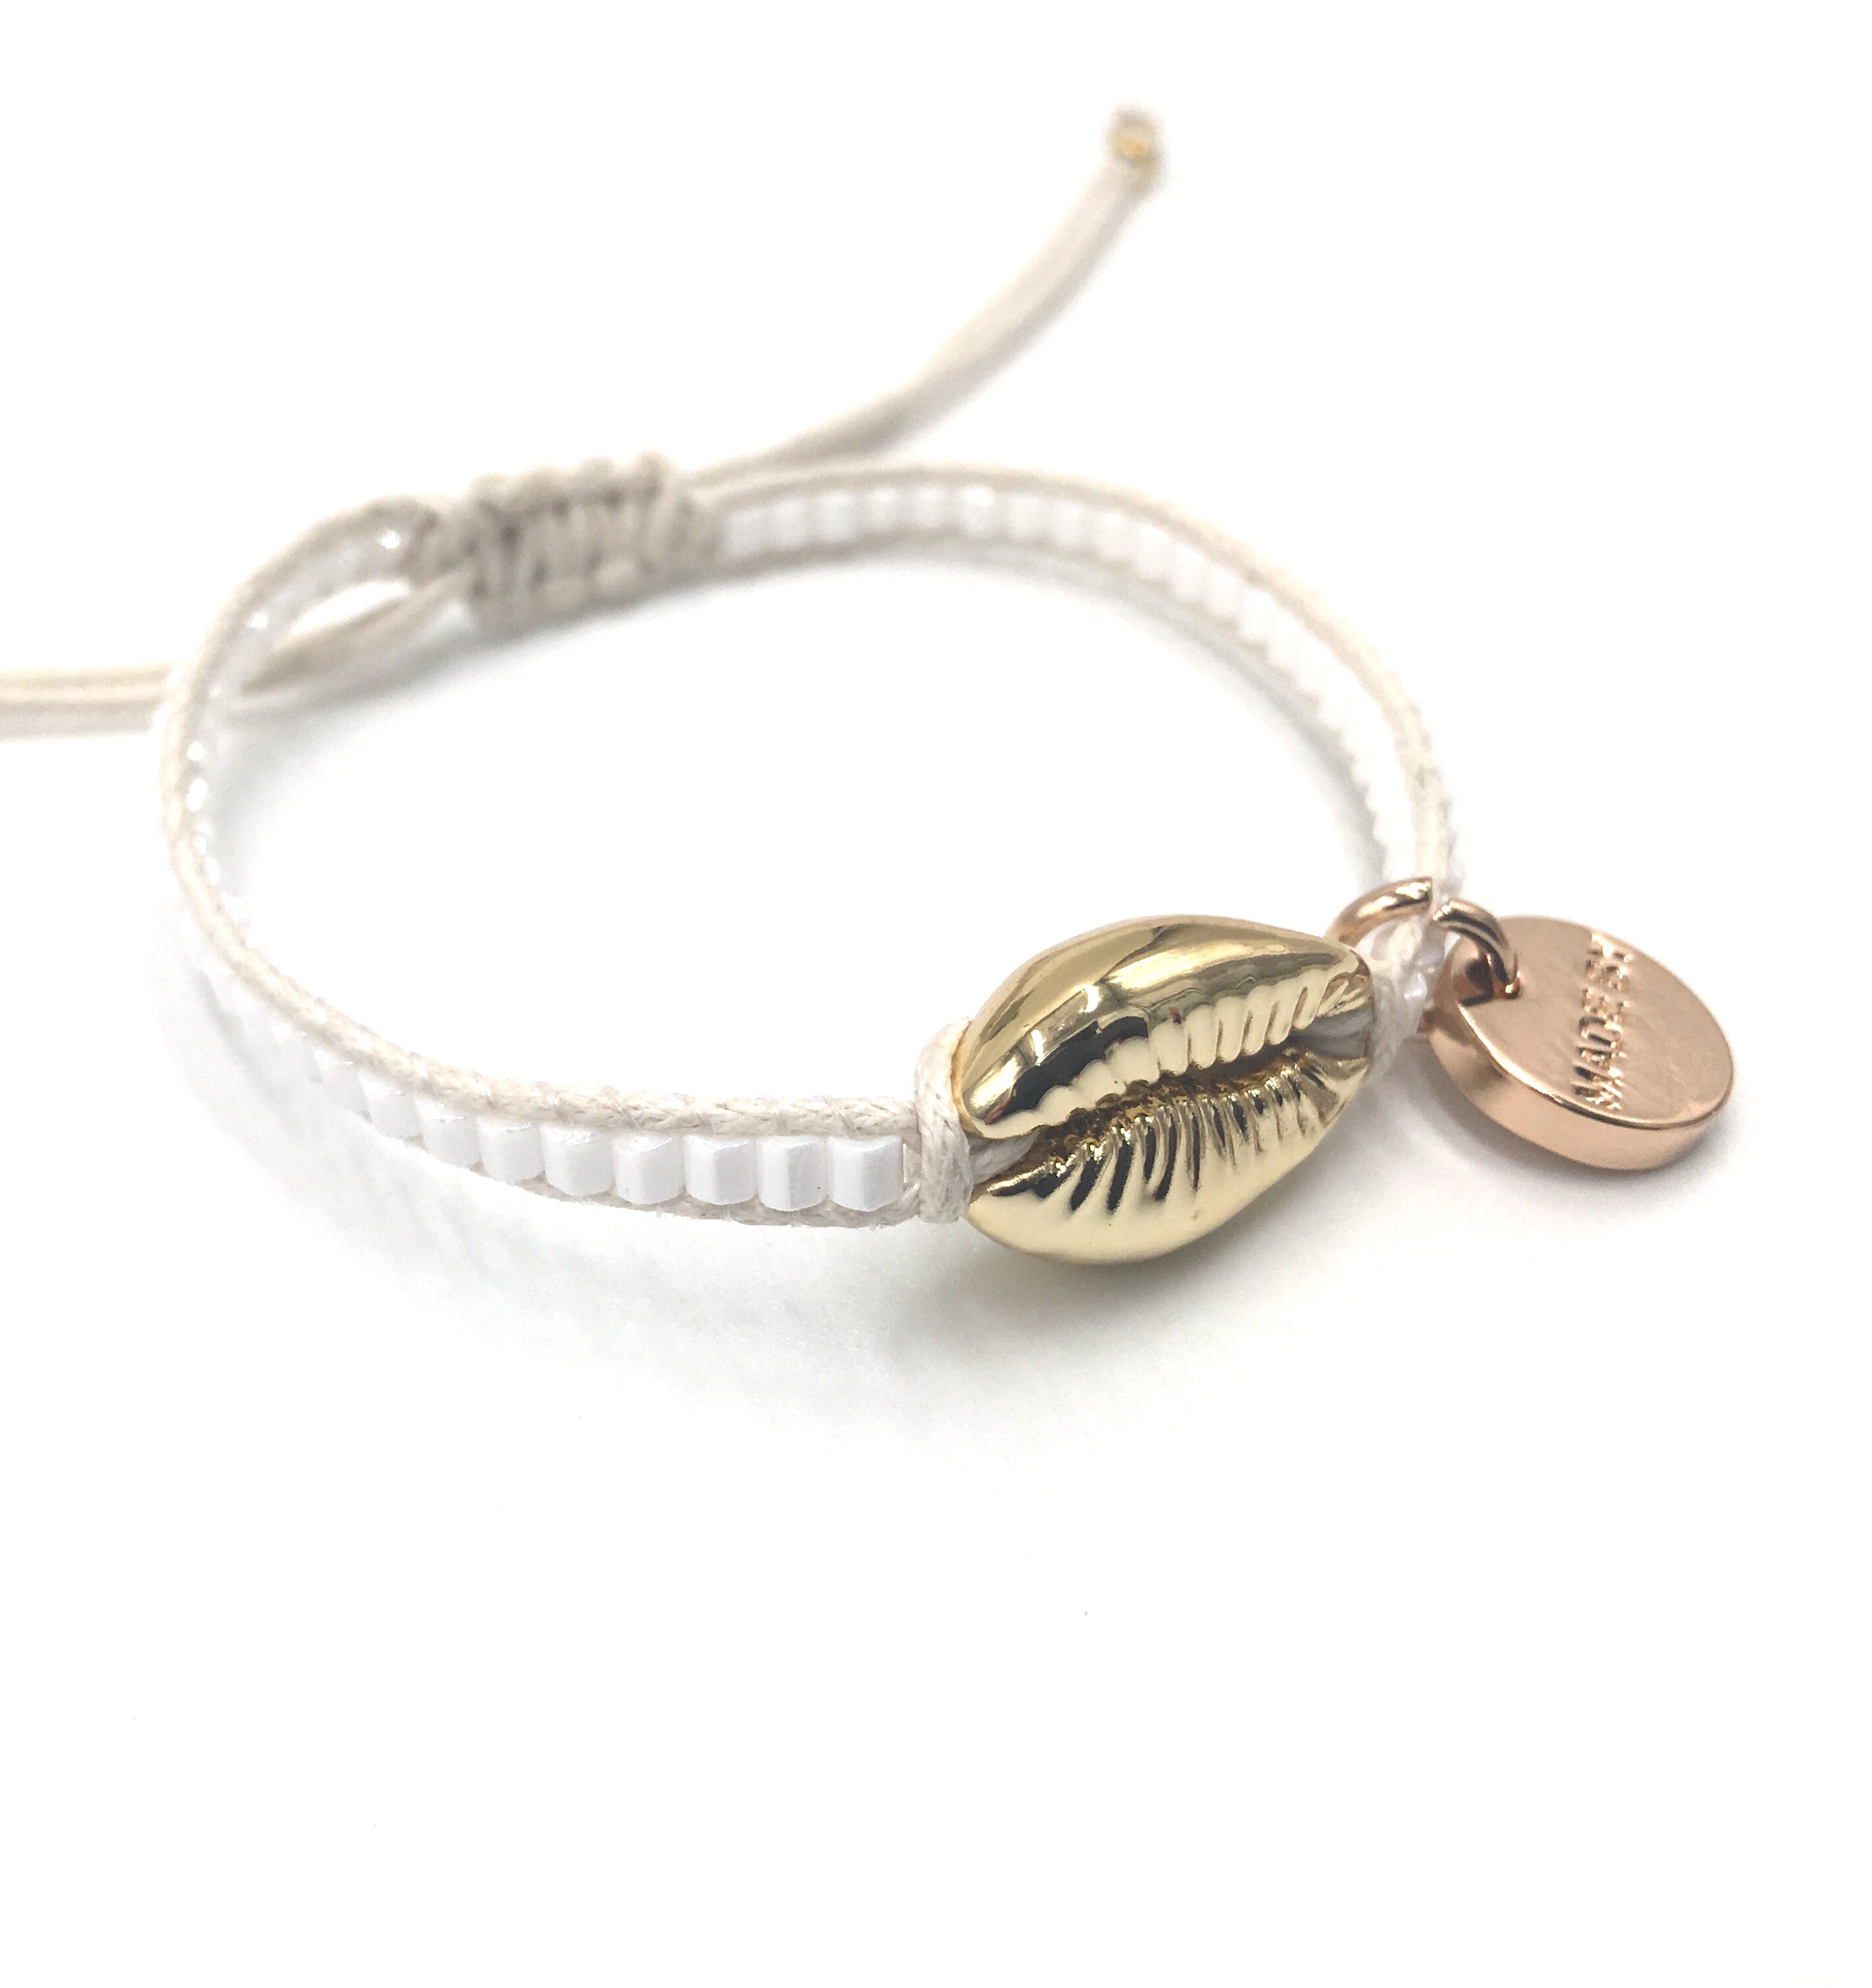 Gold Shell bracelet, white seed beads, offwhite cord